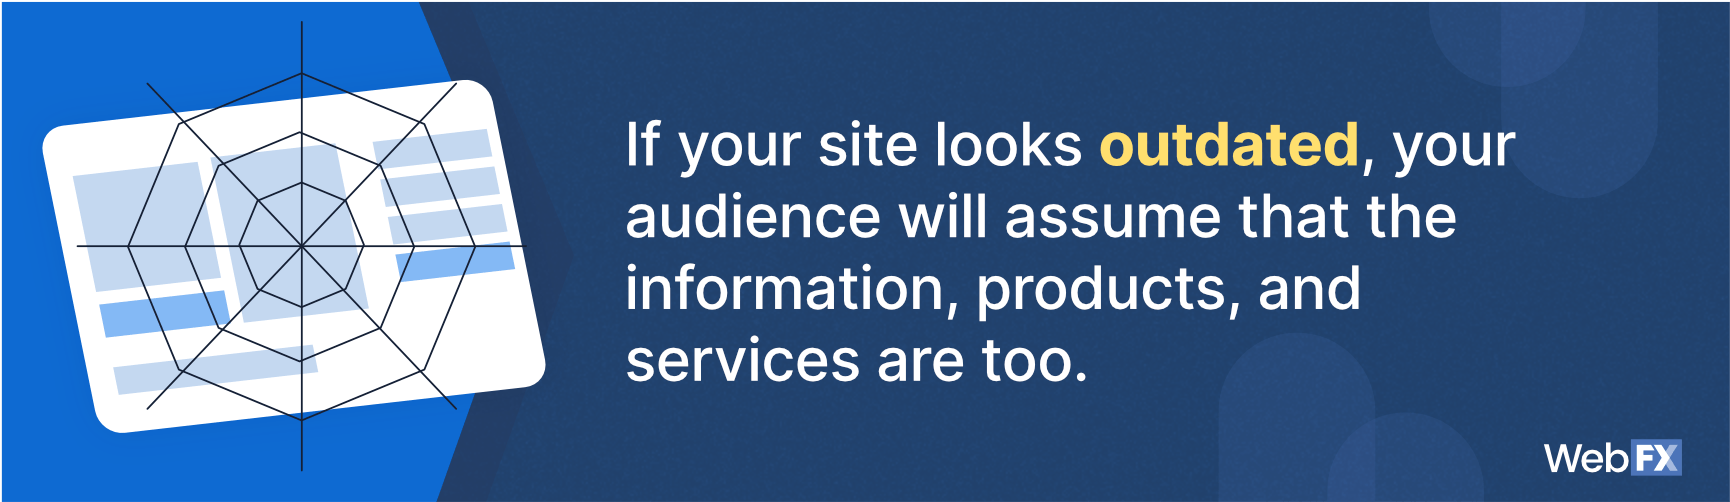 If your site looks outdated, your audience will assume the information is too